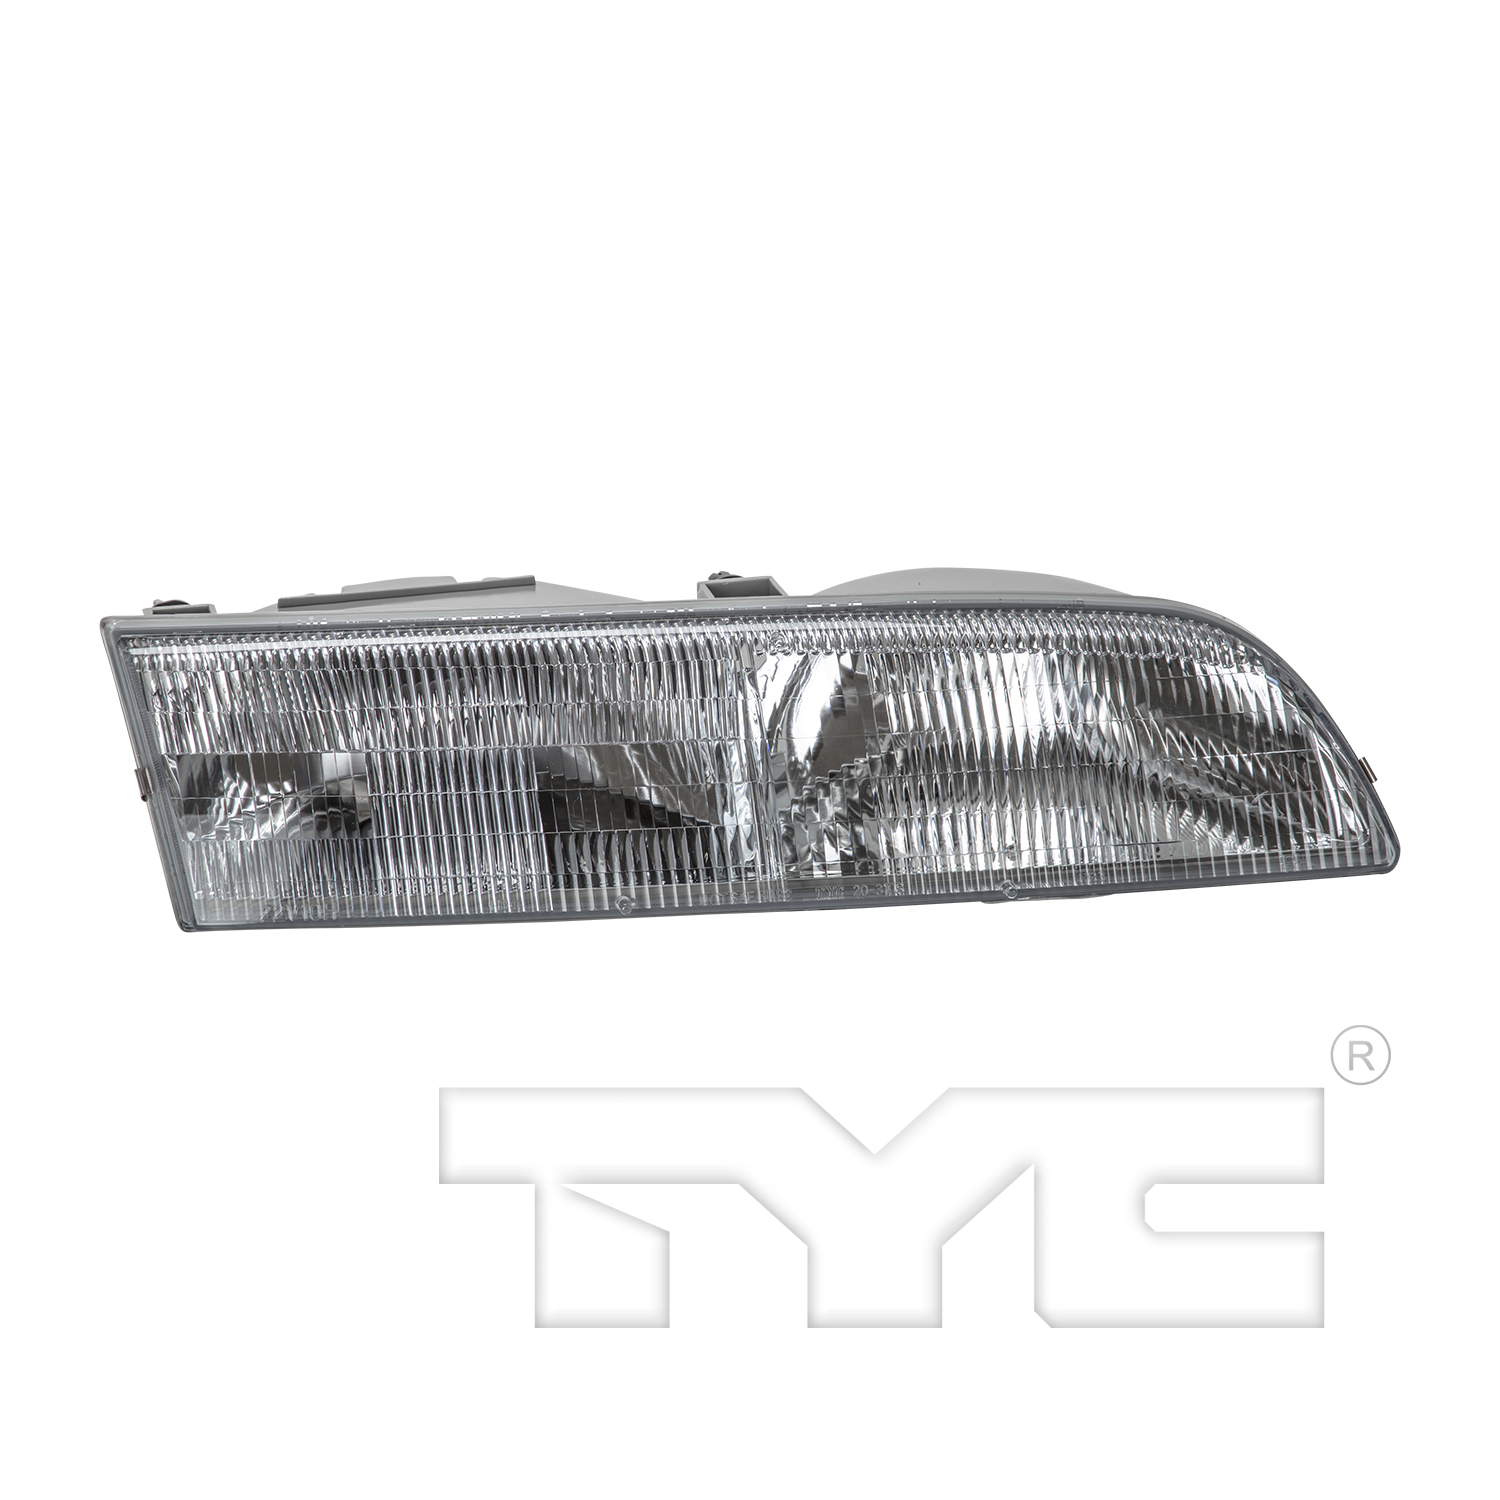 Aftermarket HEADLIGHTS for FORD - CROWN VICTORIA, CROWN VICTORIA,92-97,RT Headlamp assy composite